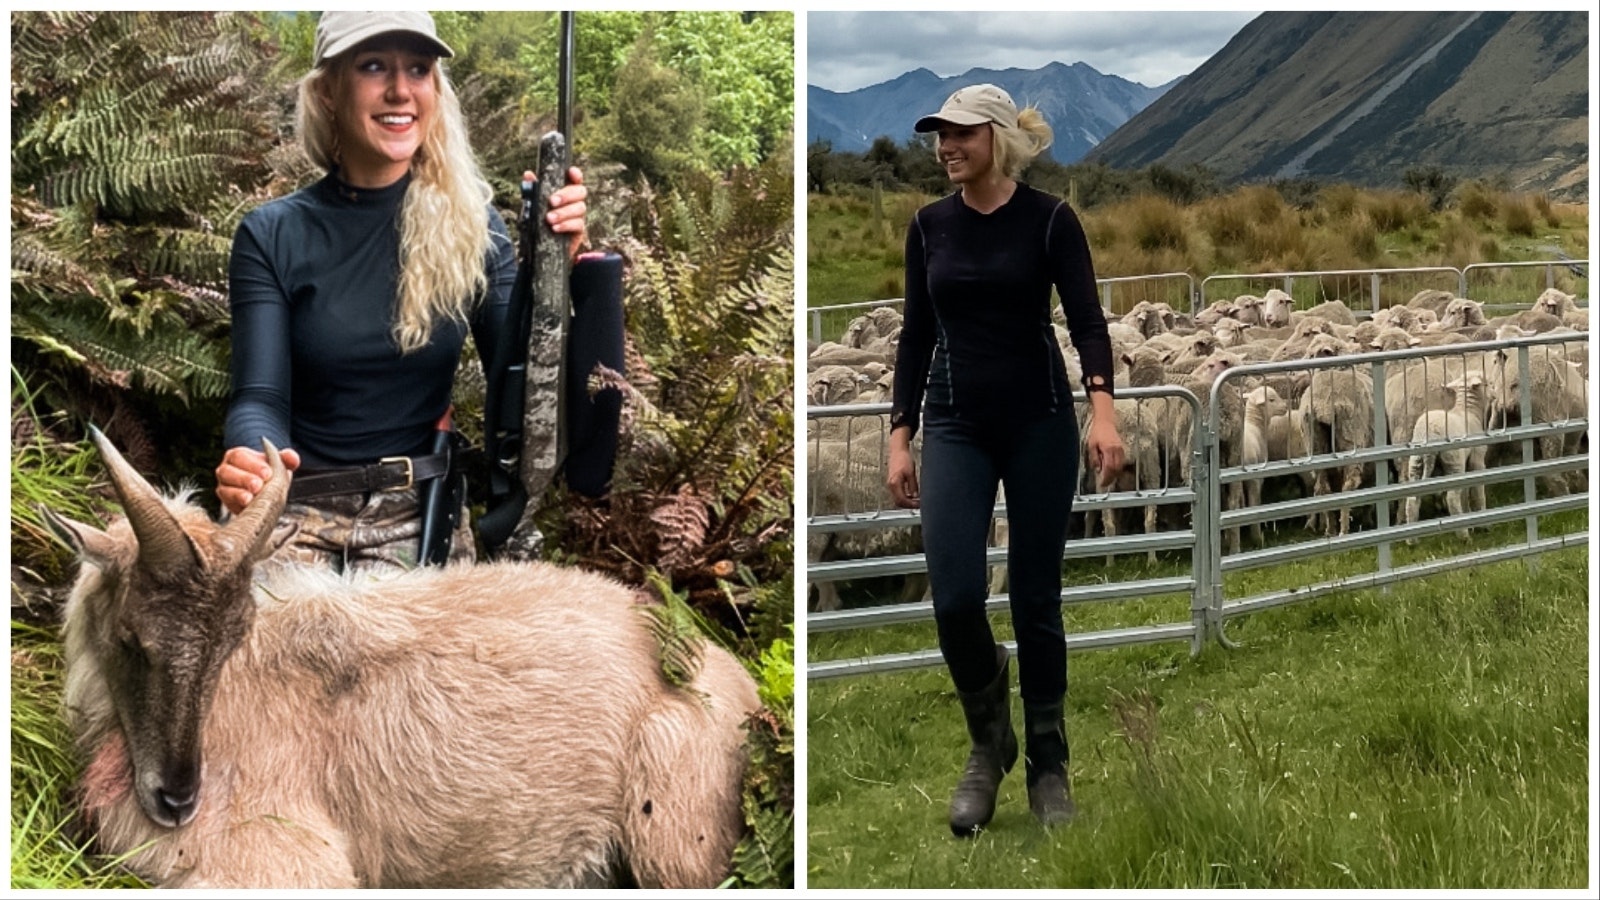 Himalaya Tahr are considered an invasive pest species in New Zealand, where Samanta Strable of Pinedale has hunted them, left. When not hunting, she works on farms and ranches in New Zealand during Wyoming winters.